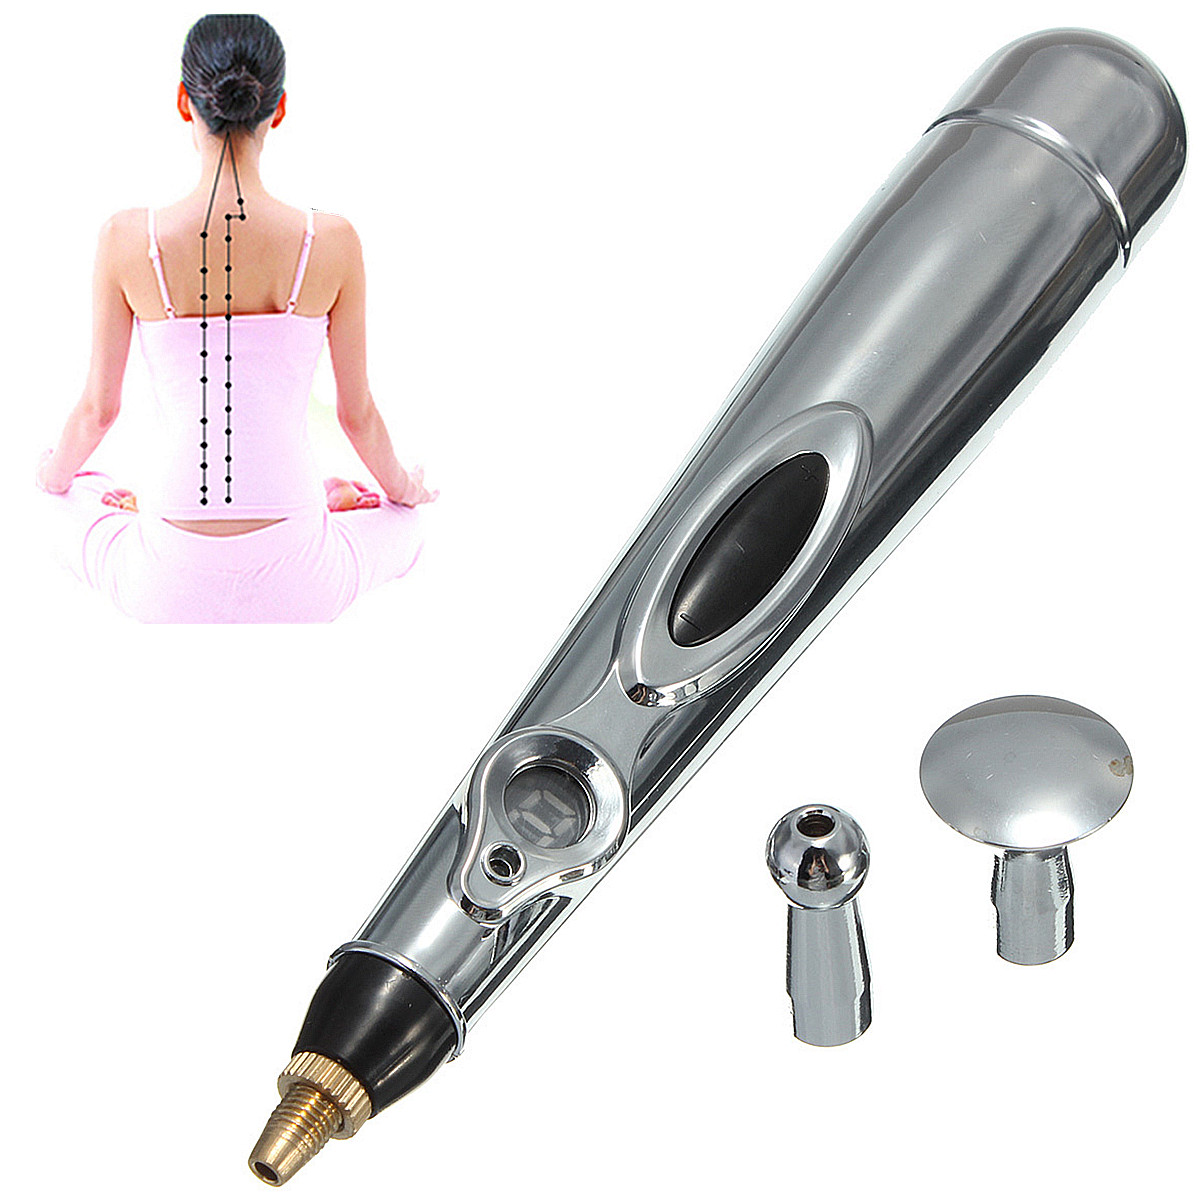 Portable-Electric-Massager-Acupuncture-Meridian-Energy-Health-Pen-Kit-Heal-Massage-Pain-1278138-2